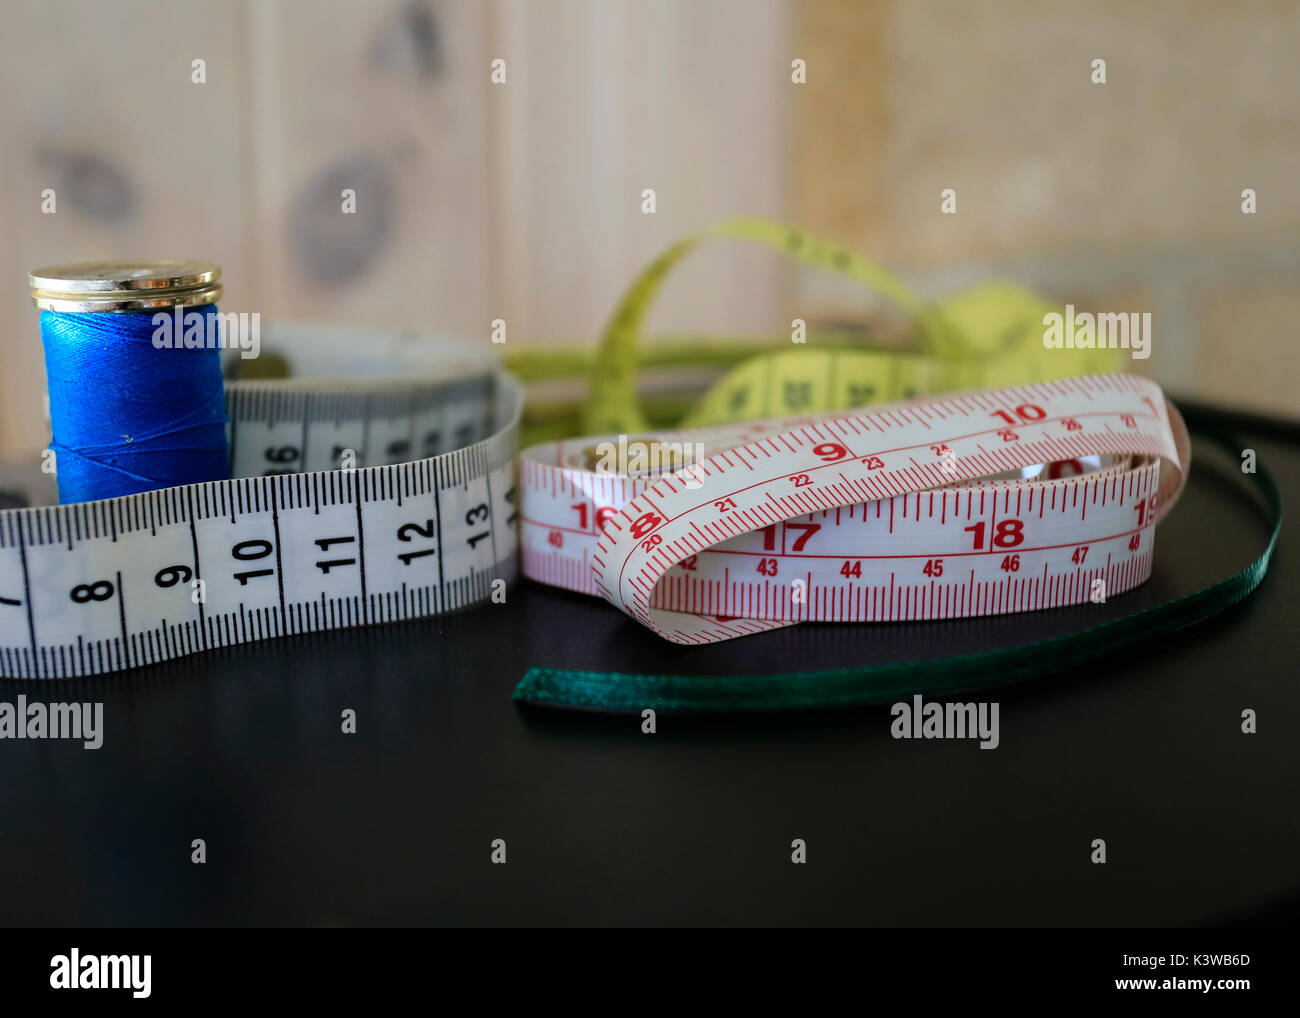 76,144 Sewing Tape Measure Images, Stock Photos, 3D objects, & Vectors